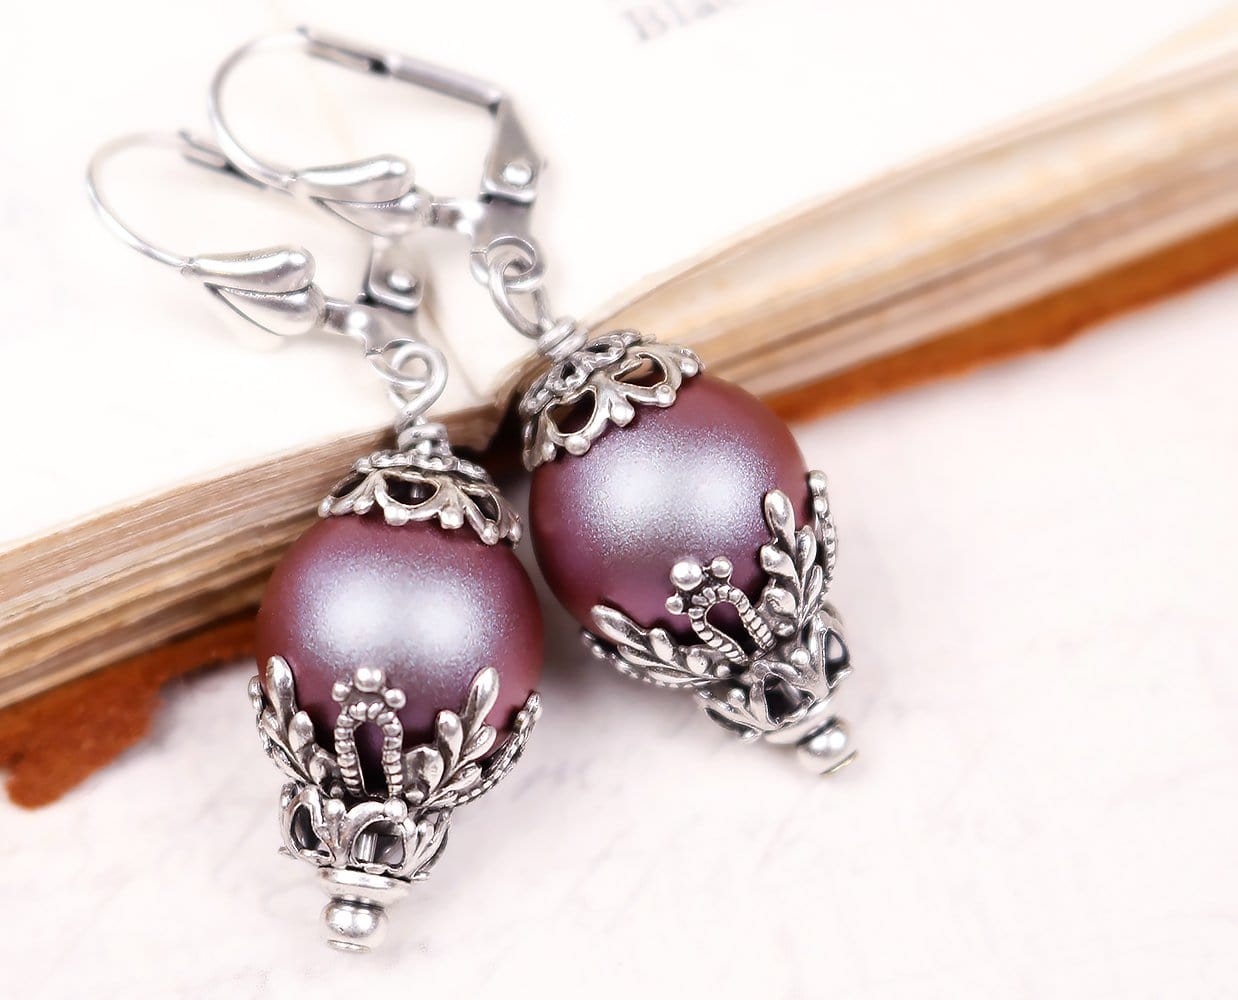 Borgia Earrings in Iridescent Red Purple Pearl and Antiqued Silver by Rabbitwood and Reason